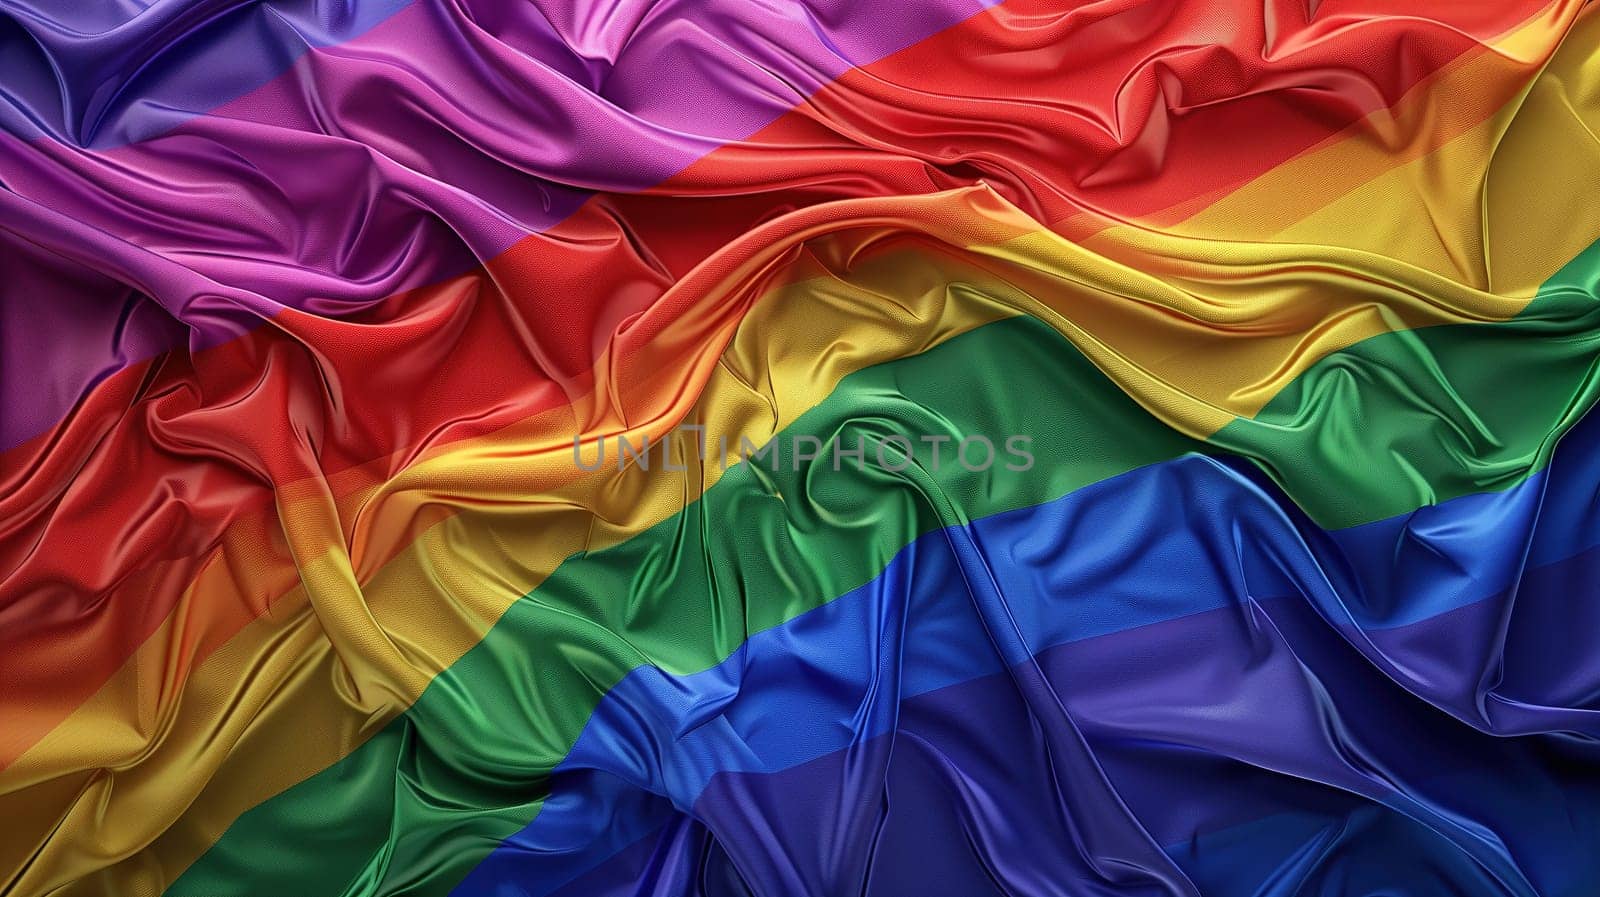 Vibrant Rainbow Pride Flag Rippling in the Breeze Celebrating LGBT Diversity by TRMK